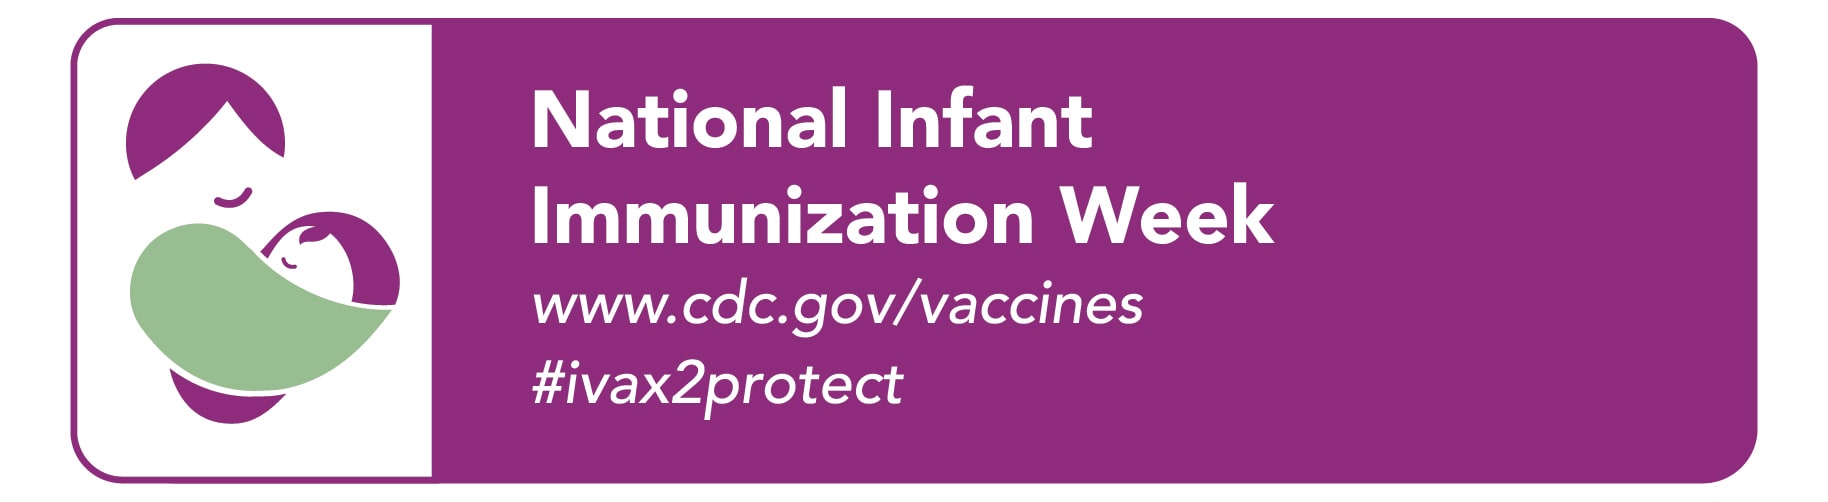 National Infant Immunization Week. April 24 - May 1, 2021. www.cdc.gov/vaccines #ivax2protect